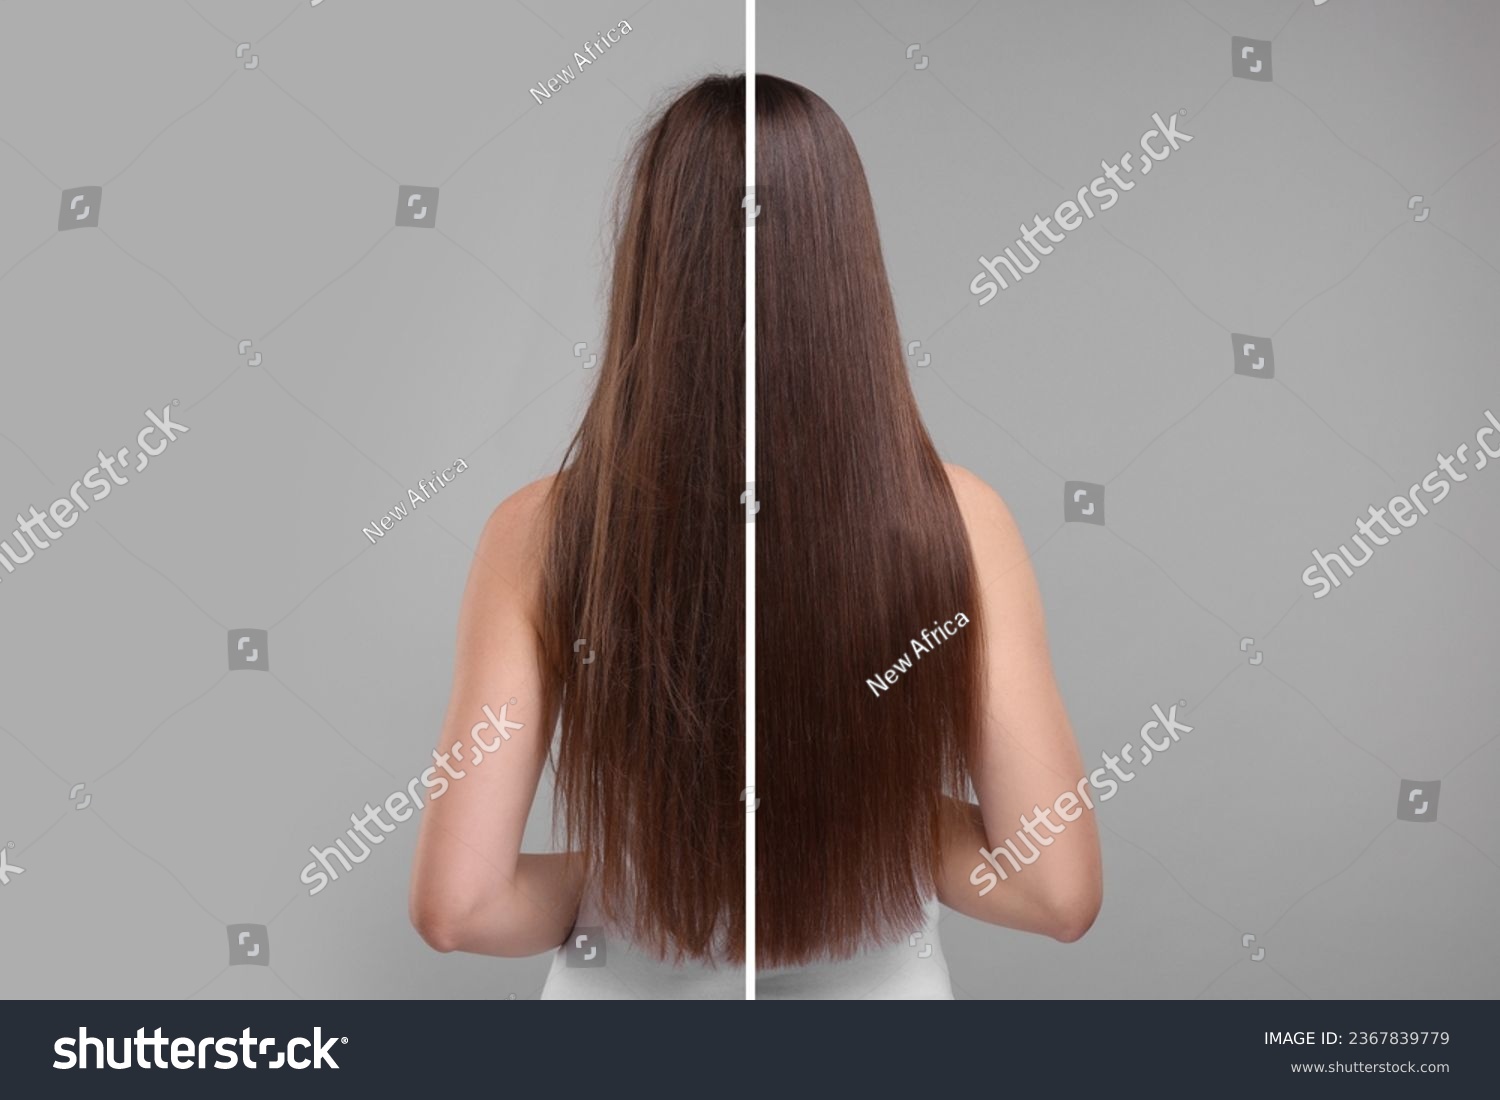 Photo of woman divided into halves before and after hair treatment on grey background, back view #2367839779